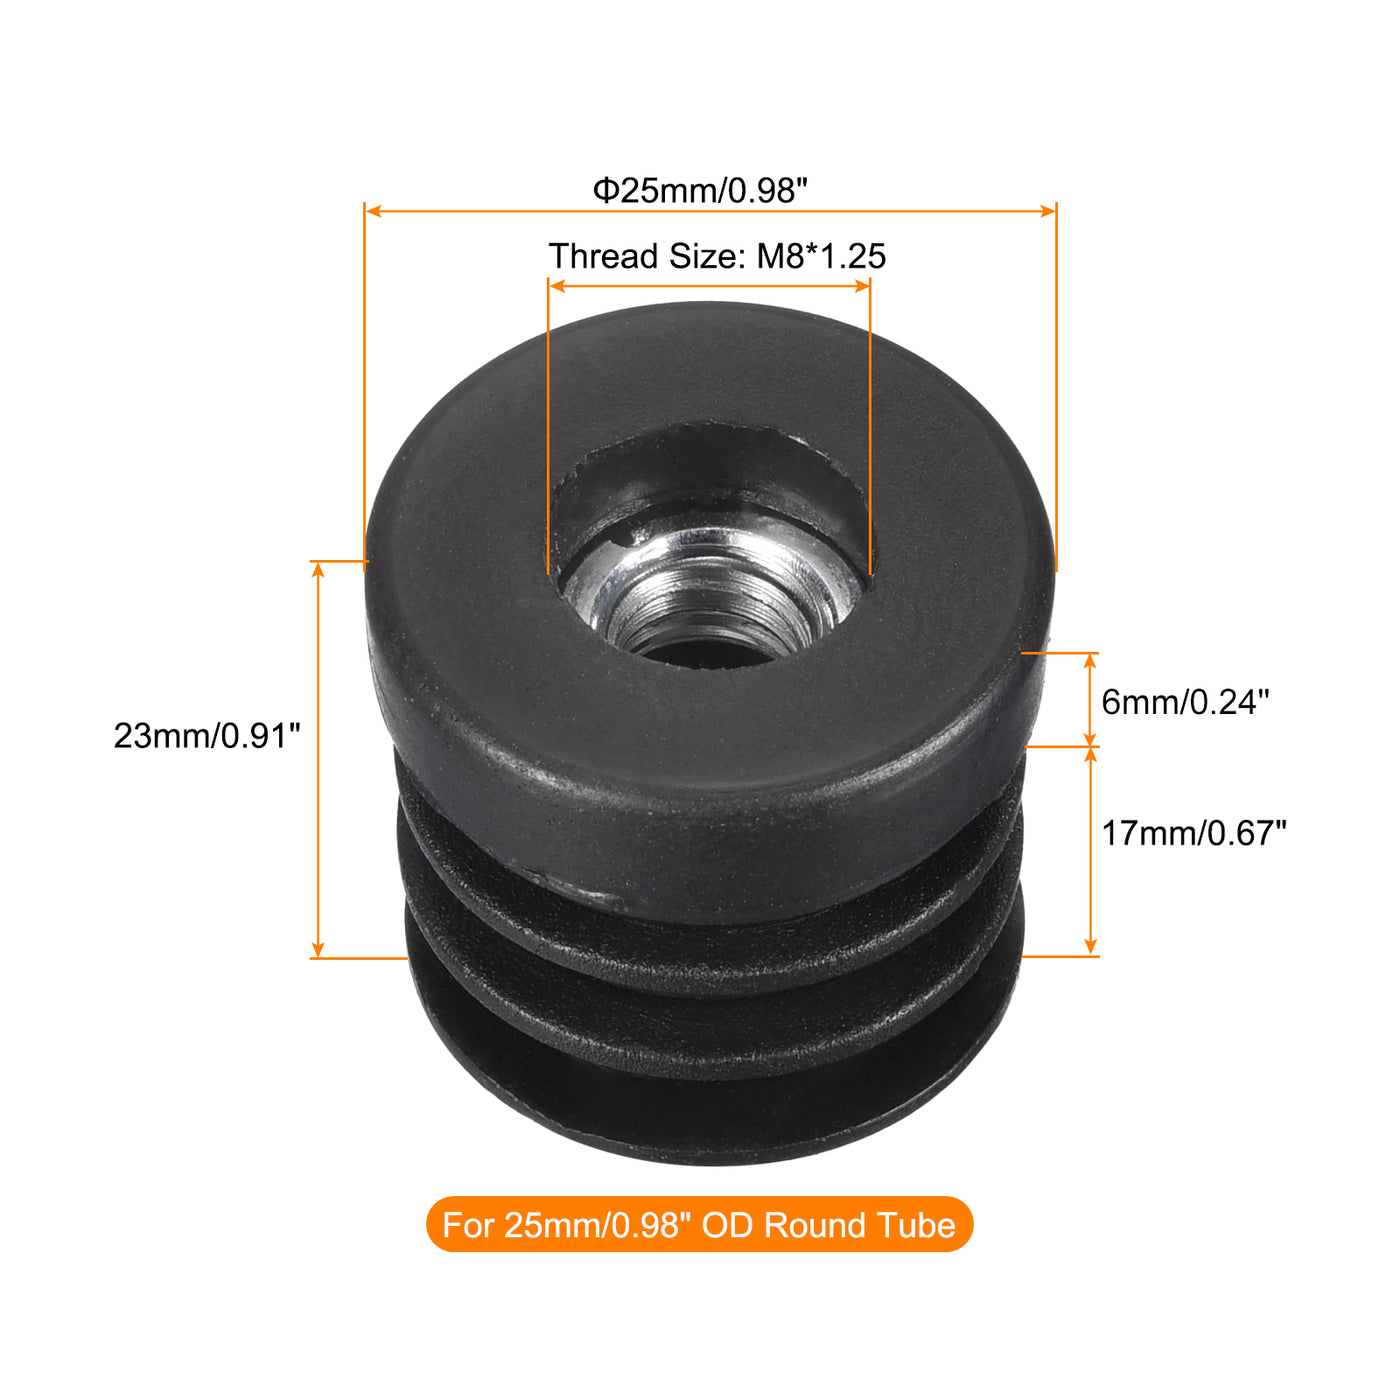 uxcell Uxcell 8Pcs 25mm/0.98" Caster Insert with Thread, Round M8 Thread for Furniture